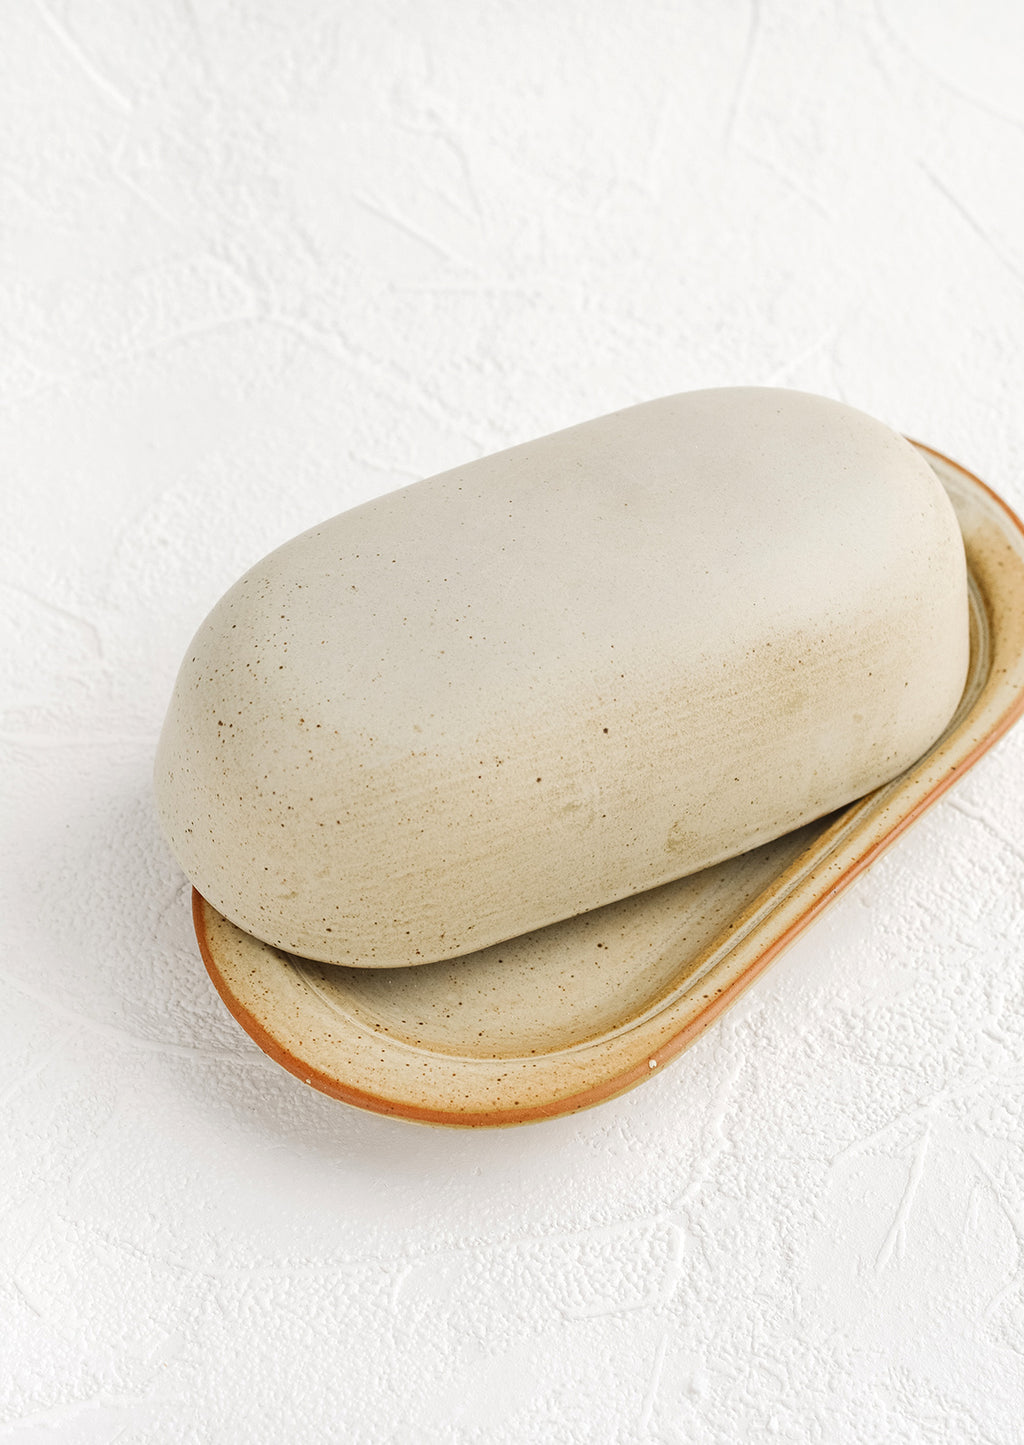 4: An oblong ceramic butter dish and tray in a softly speckled tan glaze.